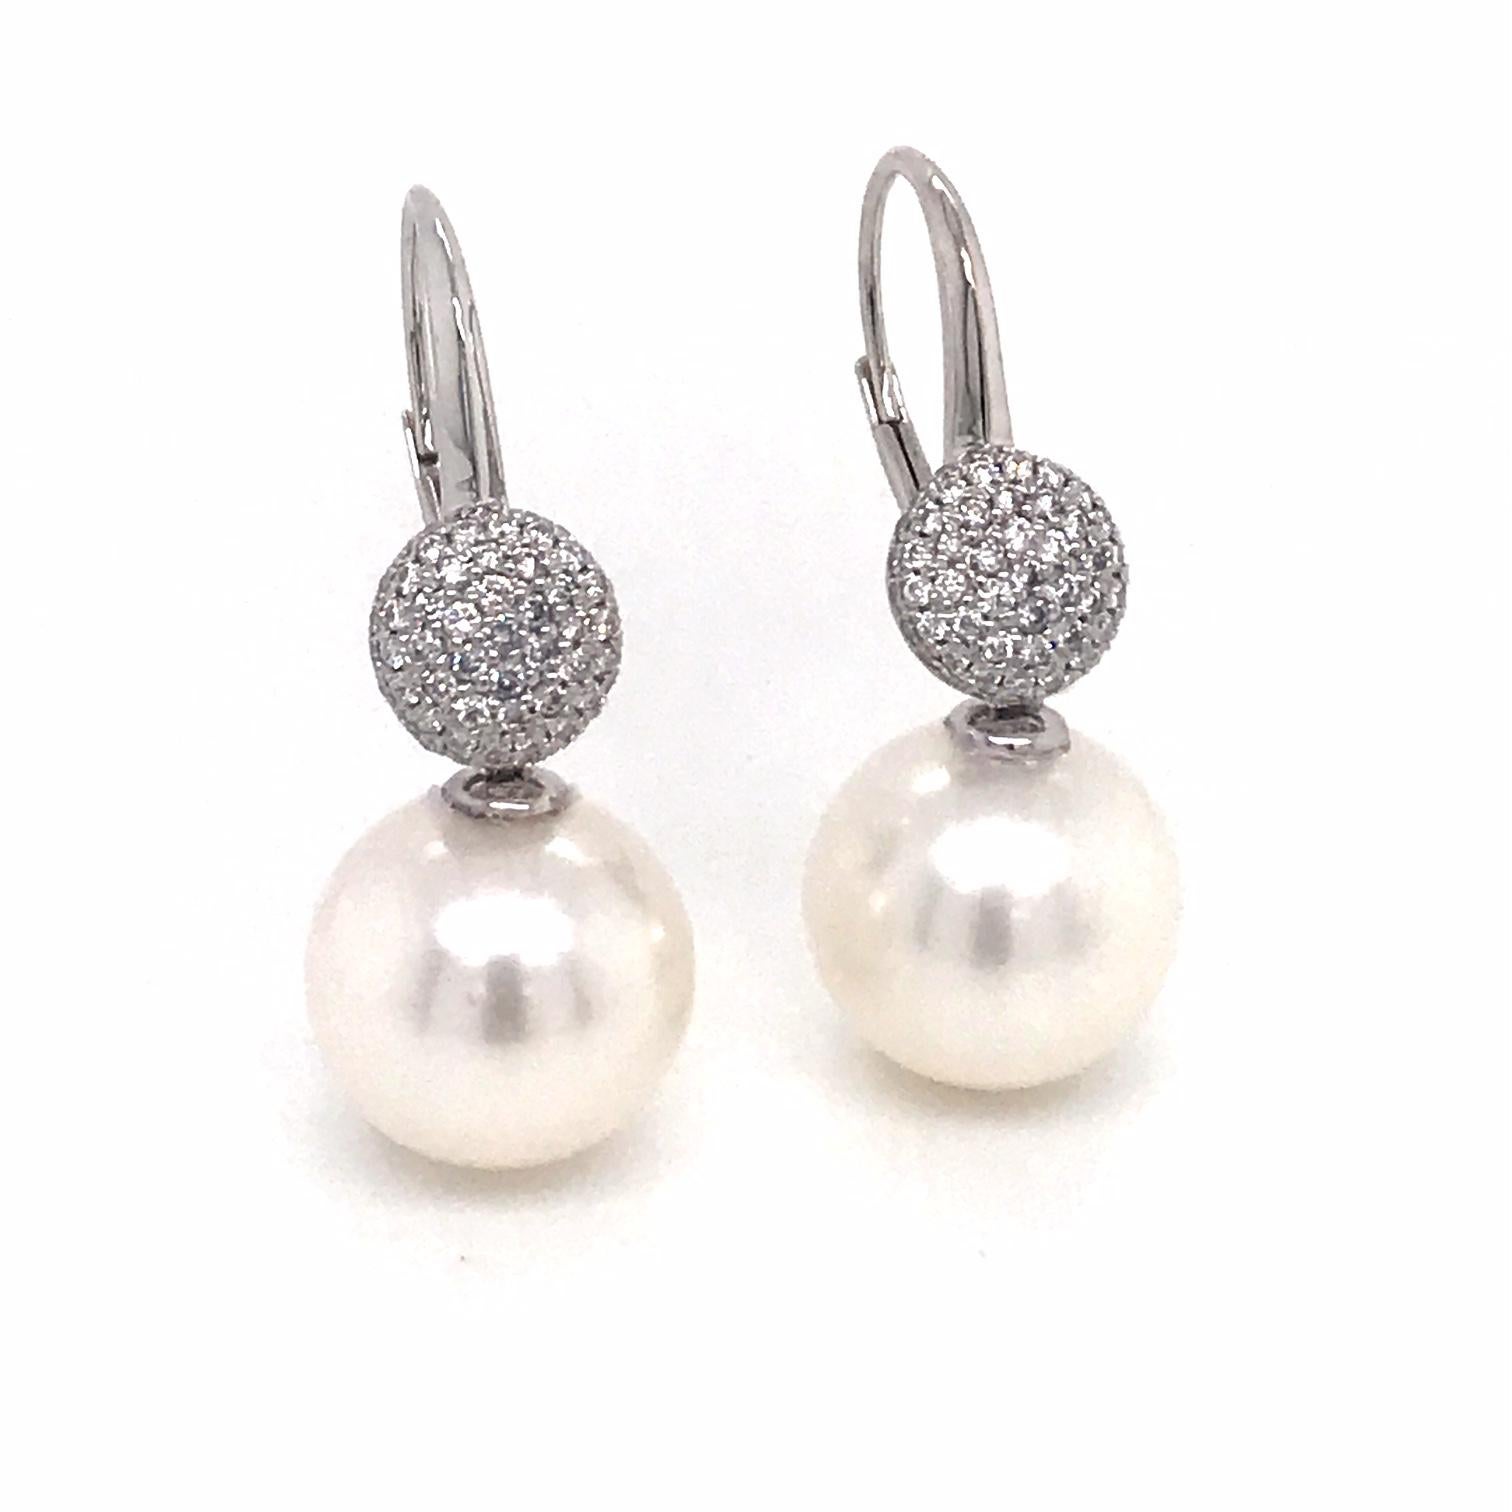 18K White gold drop earrings featuring two South Sea pearls measuring 12-13 mm with 114 round brilliants weighing 0.47 carats.
Color G-H
Clarity SI

Pearl can be changed to a Pink, Golden or Tahitian Pearl upon request. Price subject to